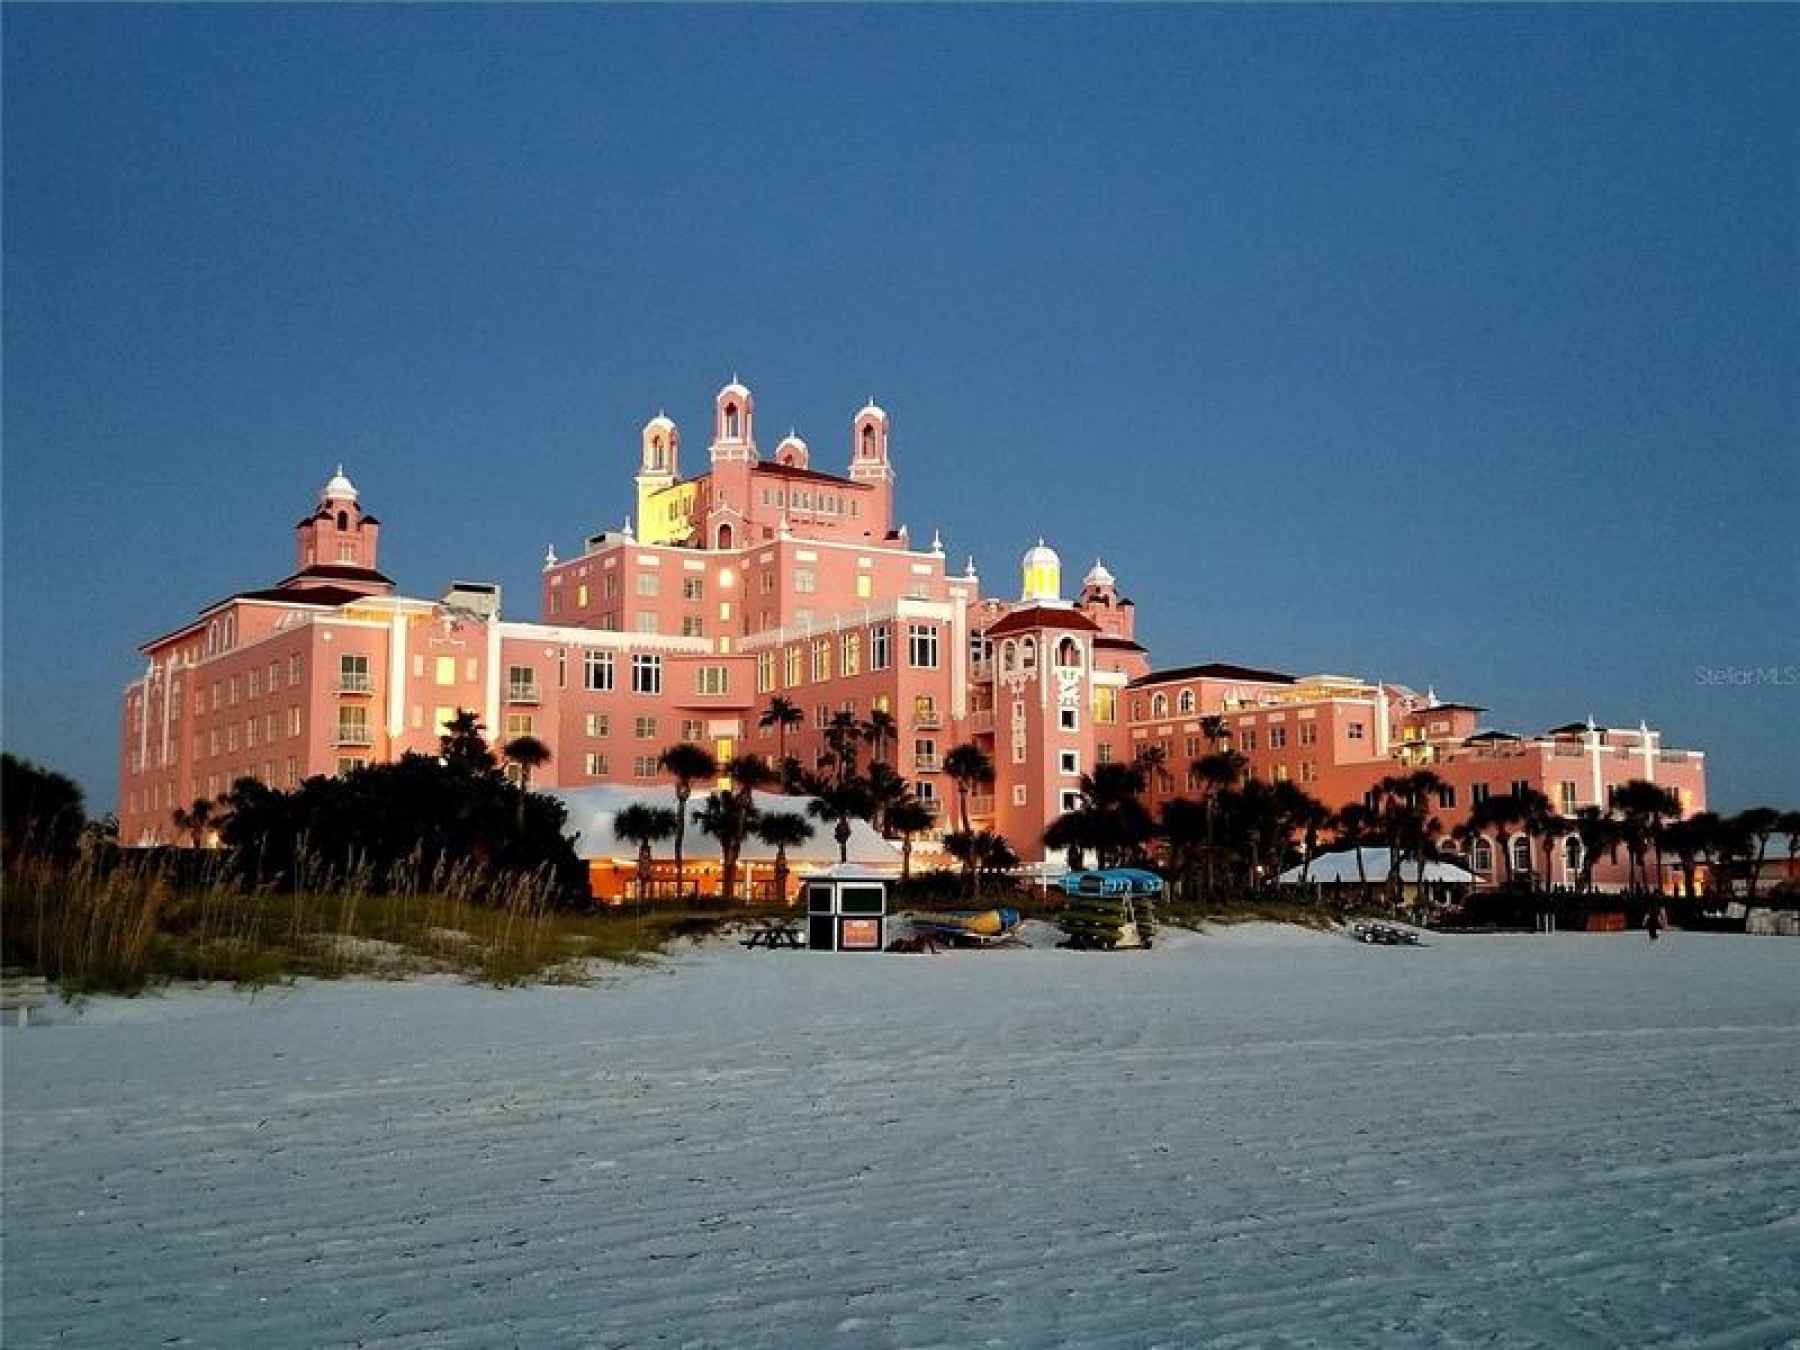 Iconic Don Cesar Hotel on St Pete Beach.